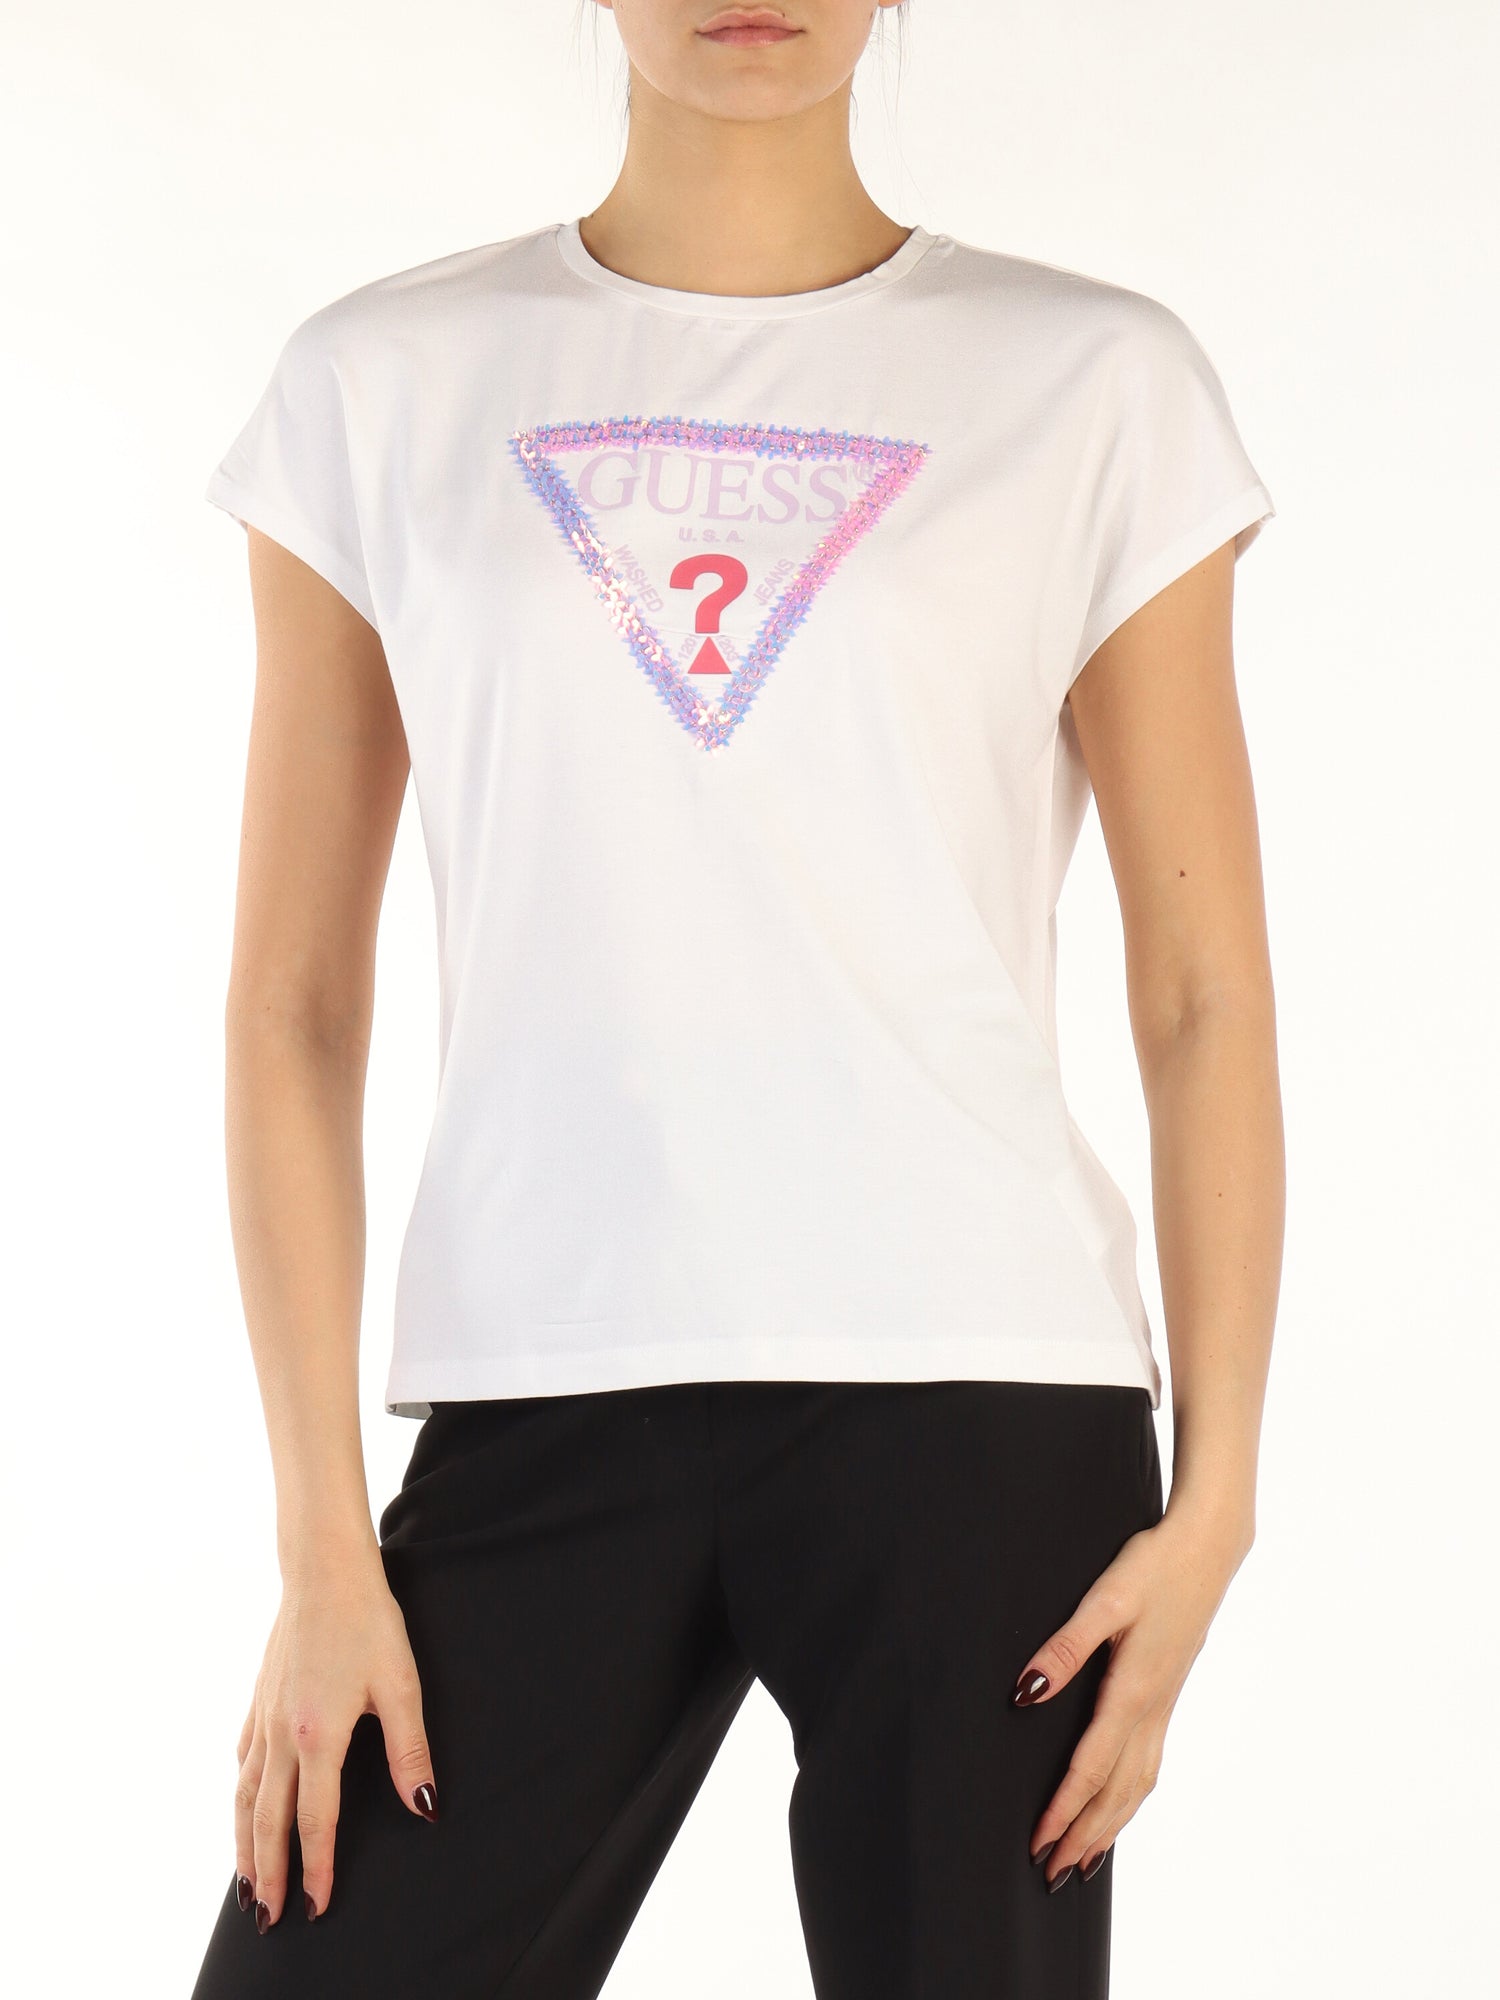 GUESS JEANS T-SHIRT MANICA CORTA FLOWERS TRIANGLE BIANCO